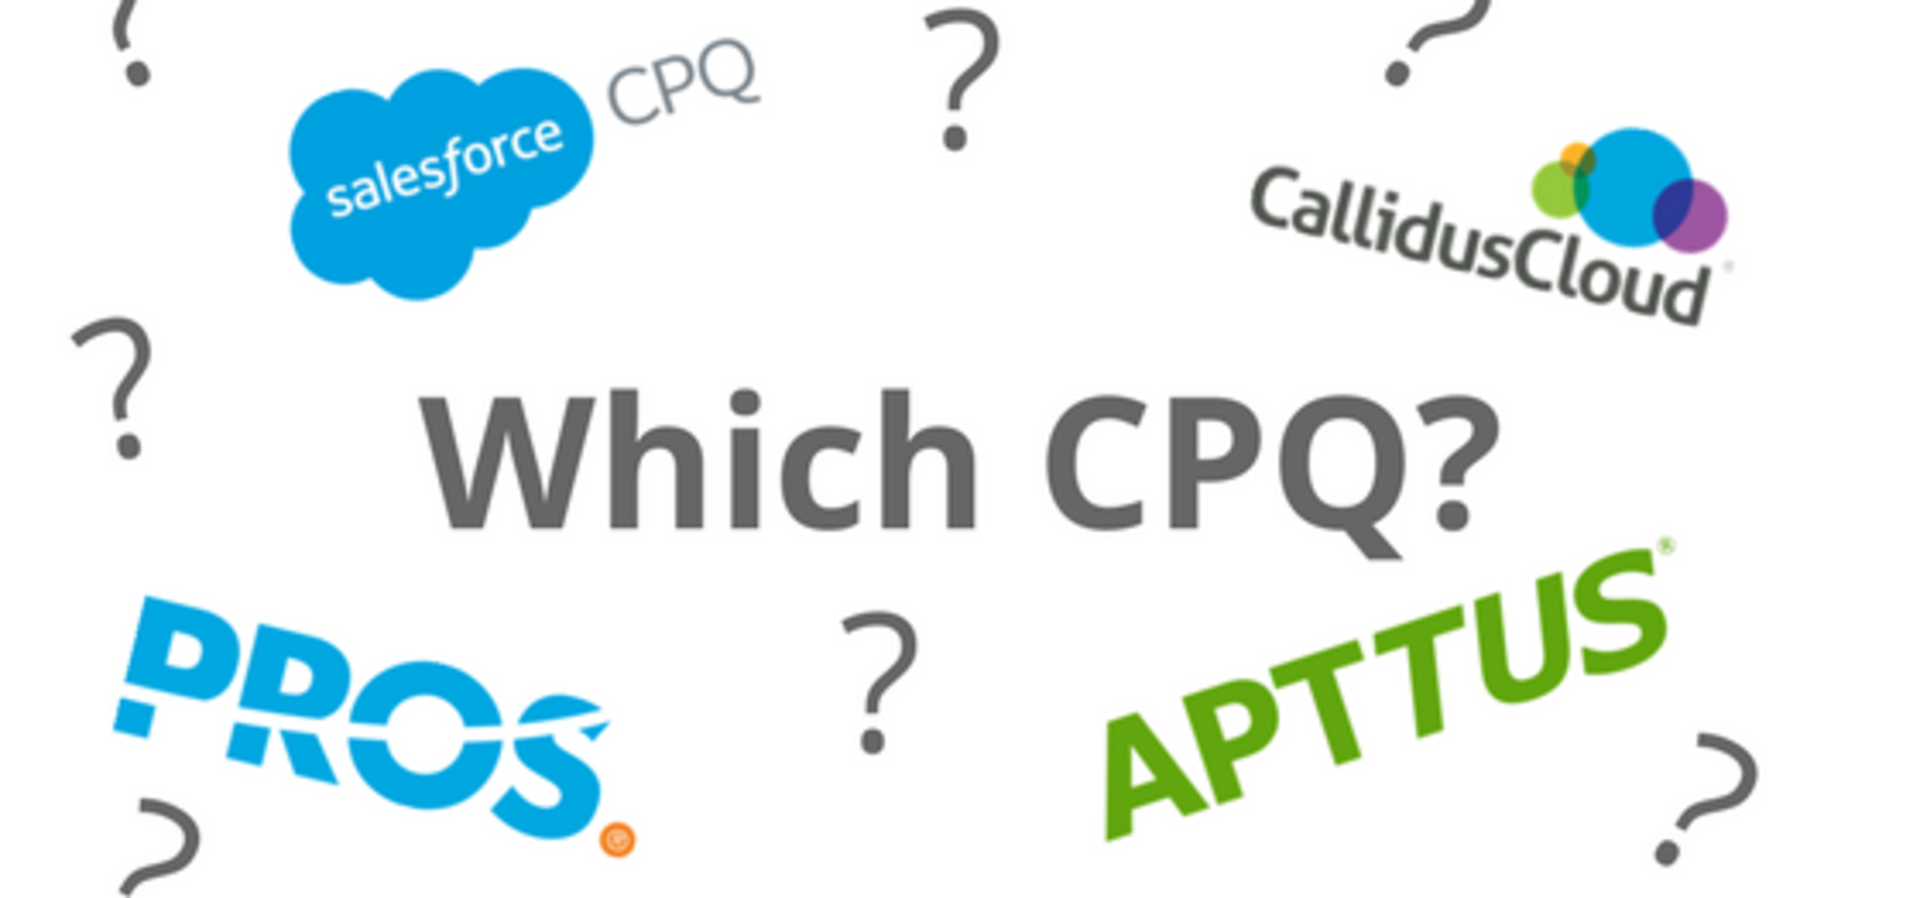 Which Salesforce CPQ is right for you?